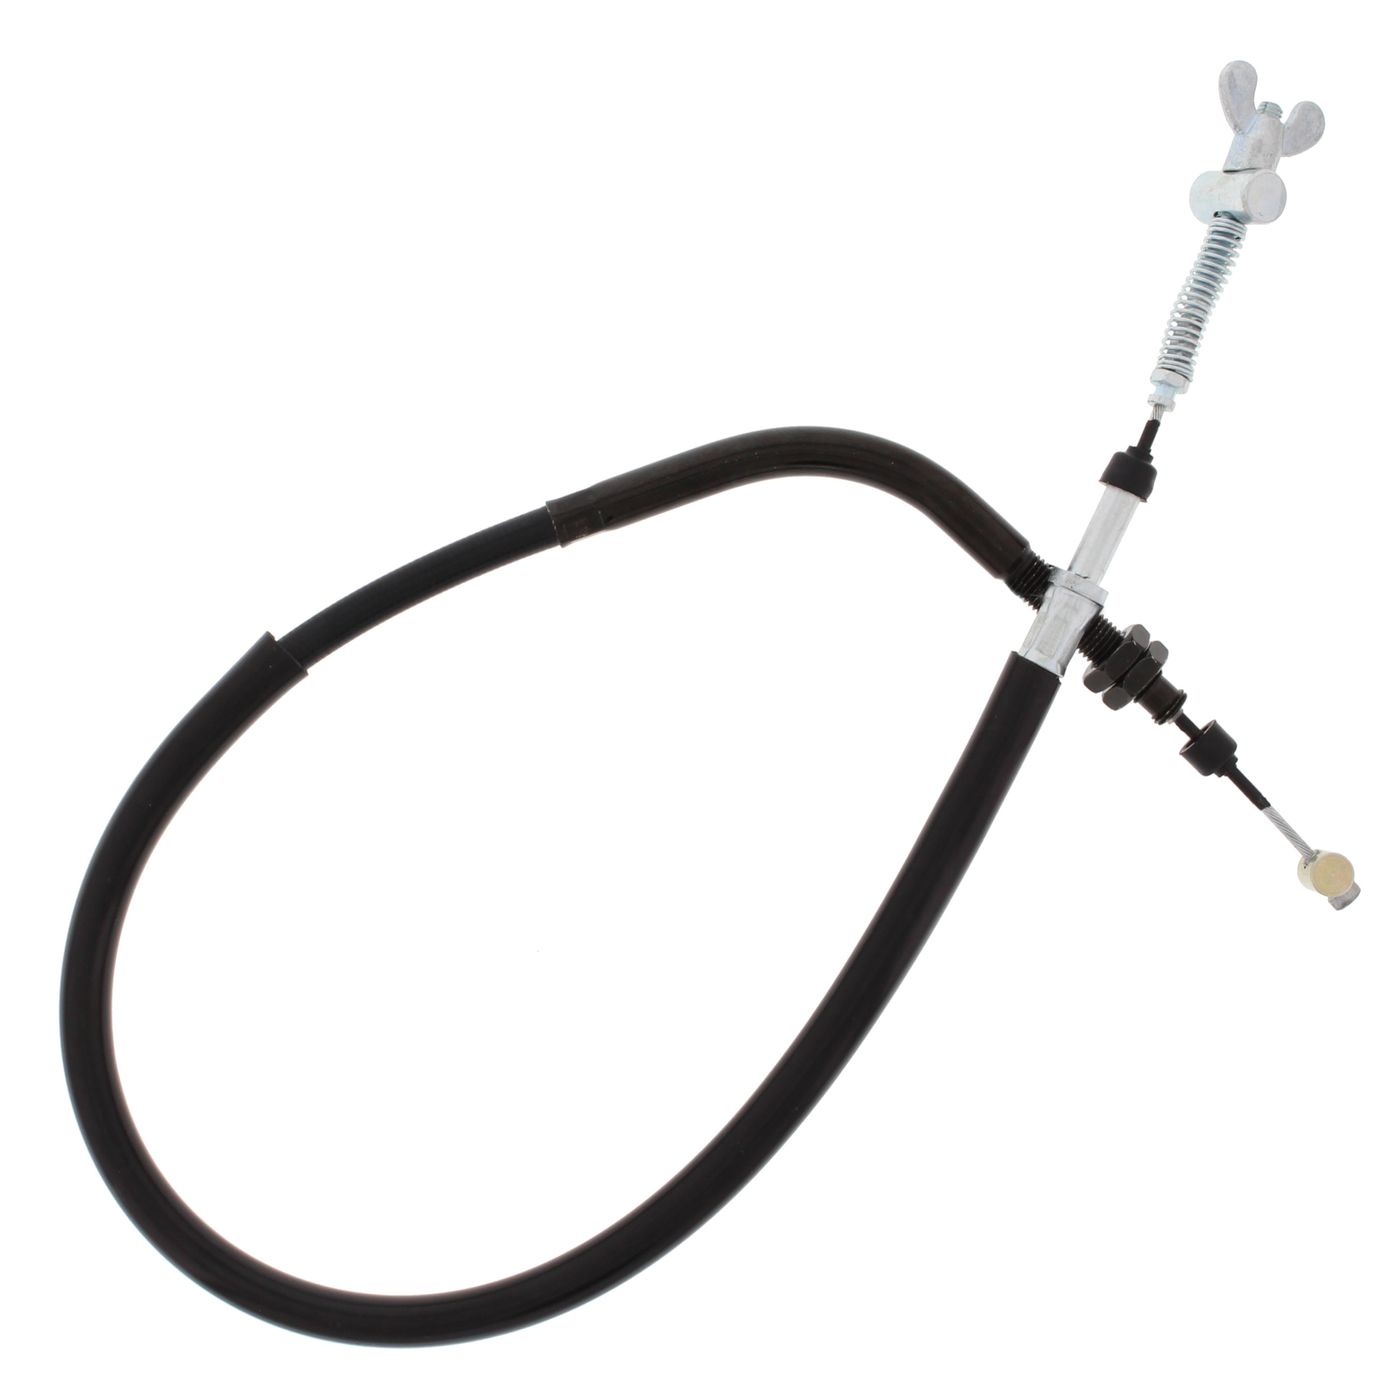 Wrp Brake Cables - WRP454031 image